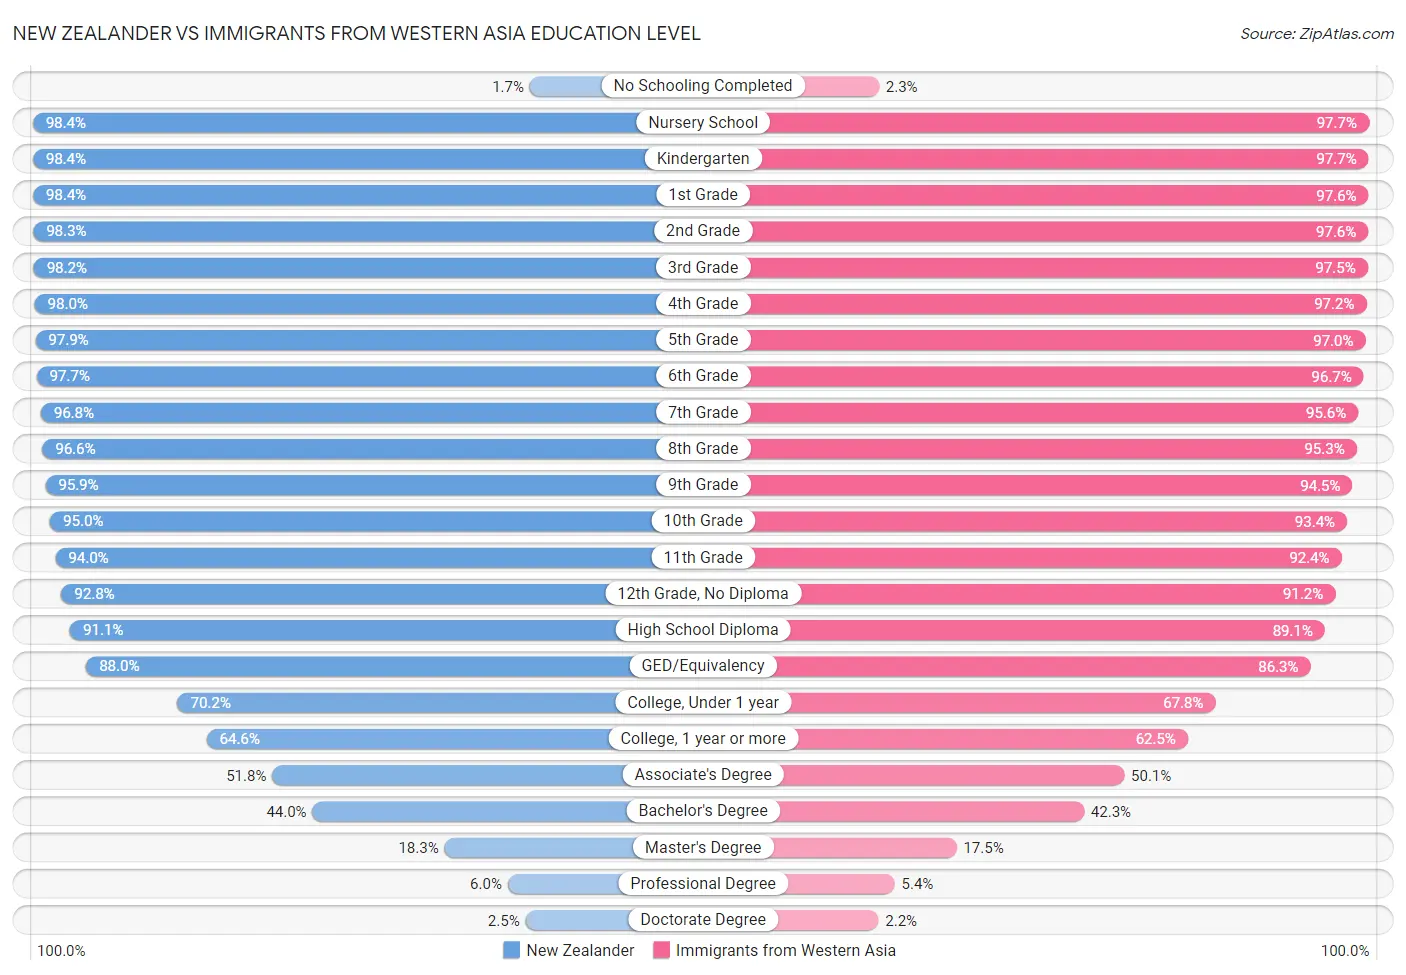 New Zealander vs Immigrants from Western Asia Education Level